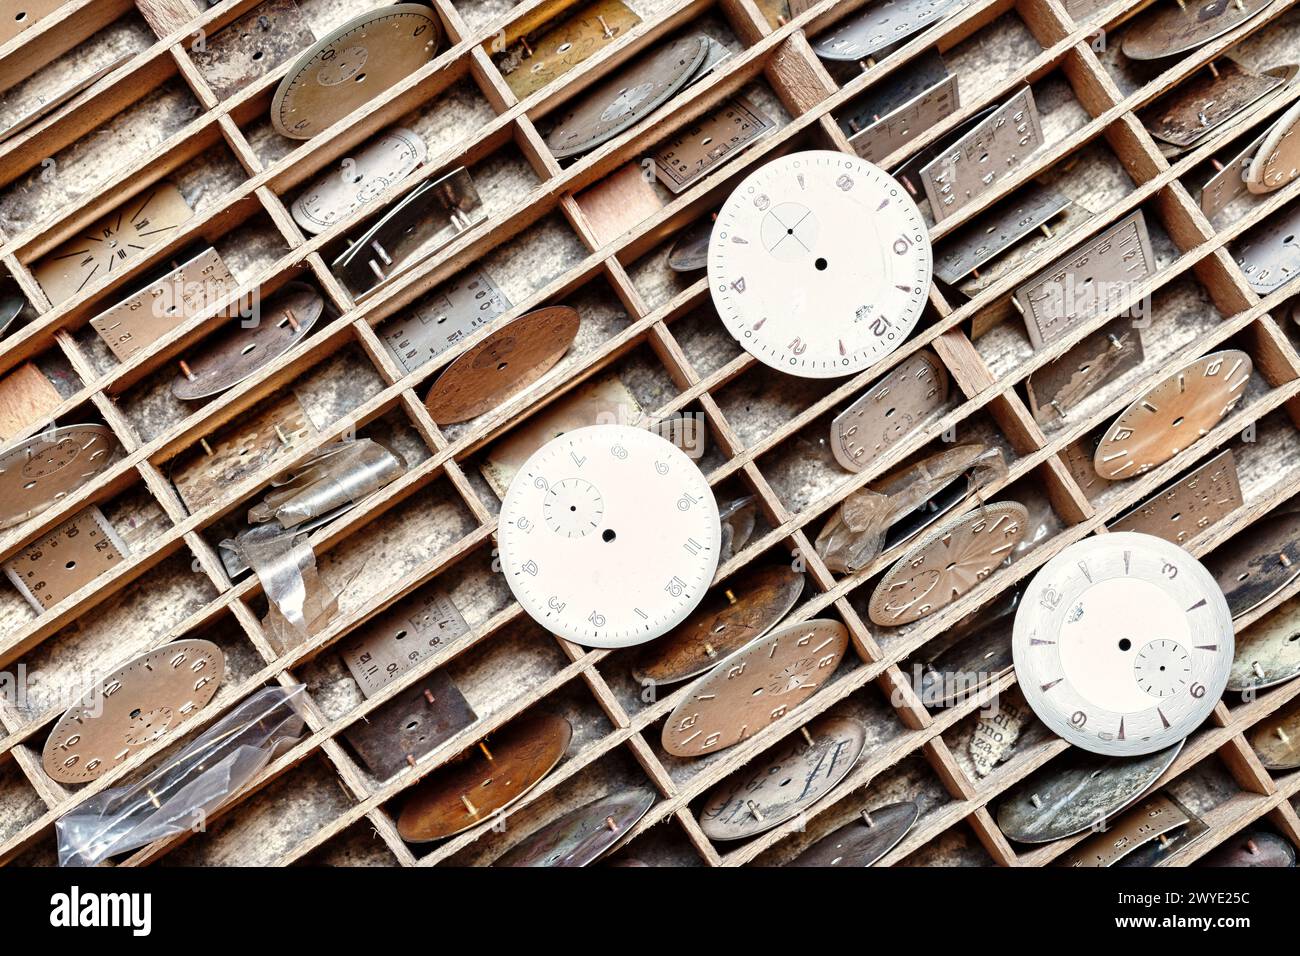 Precisely arranged watch faces in wooden grids stand ready for their mechanical symphony to resume Stock Photo